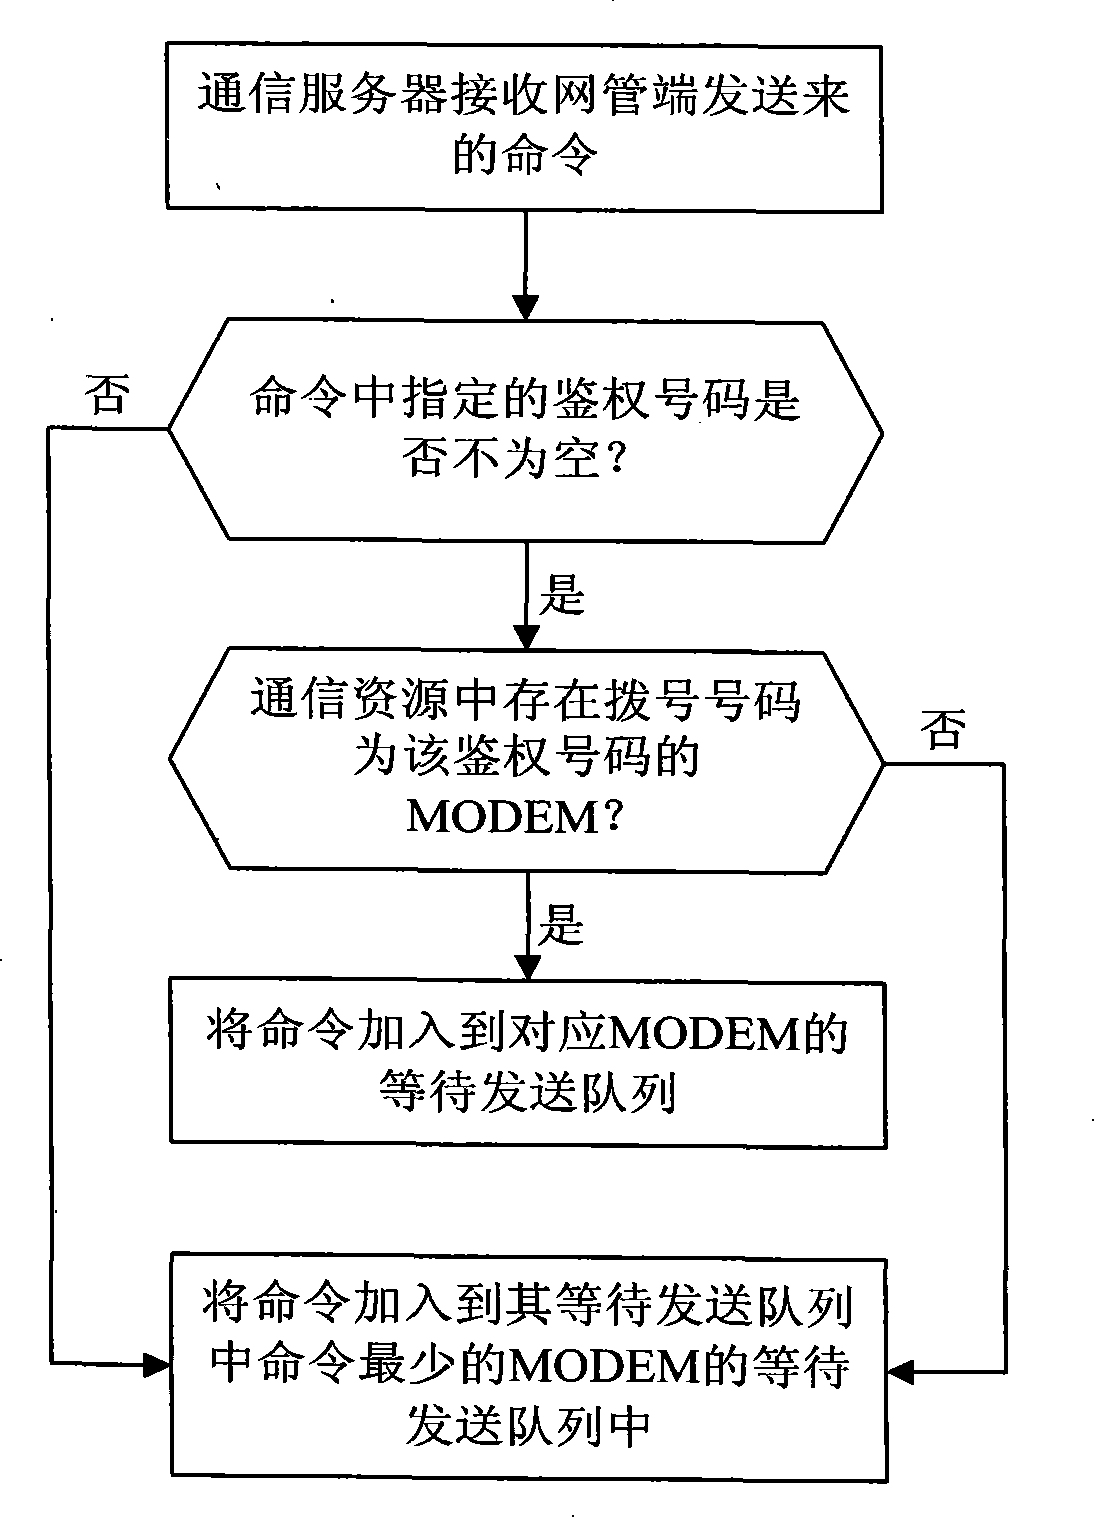 A polling realization method and device for network management monitoring system